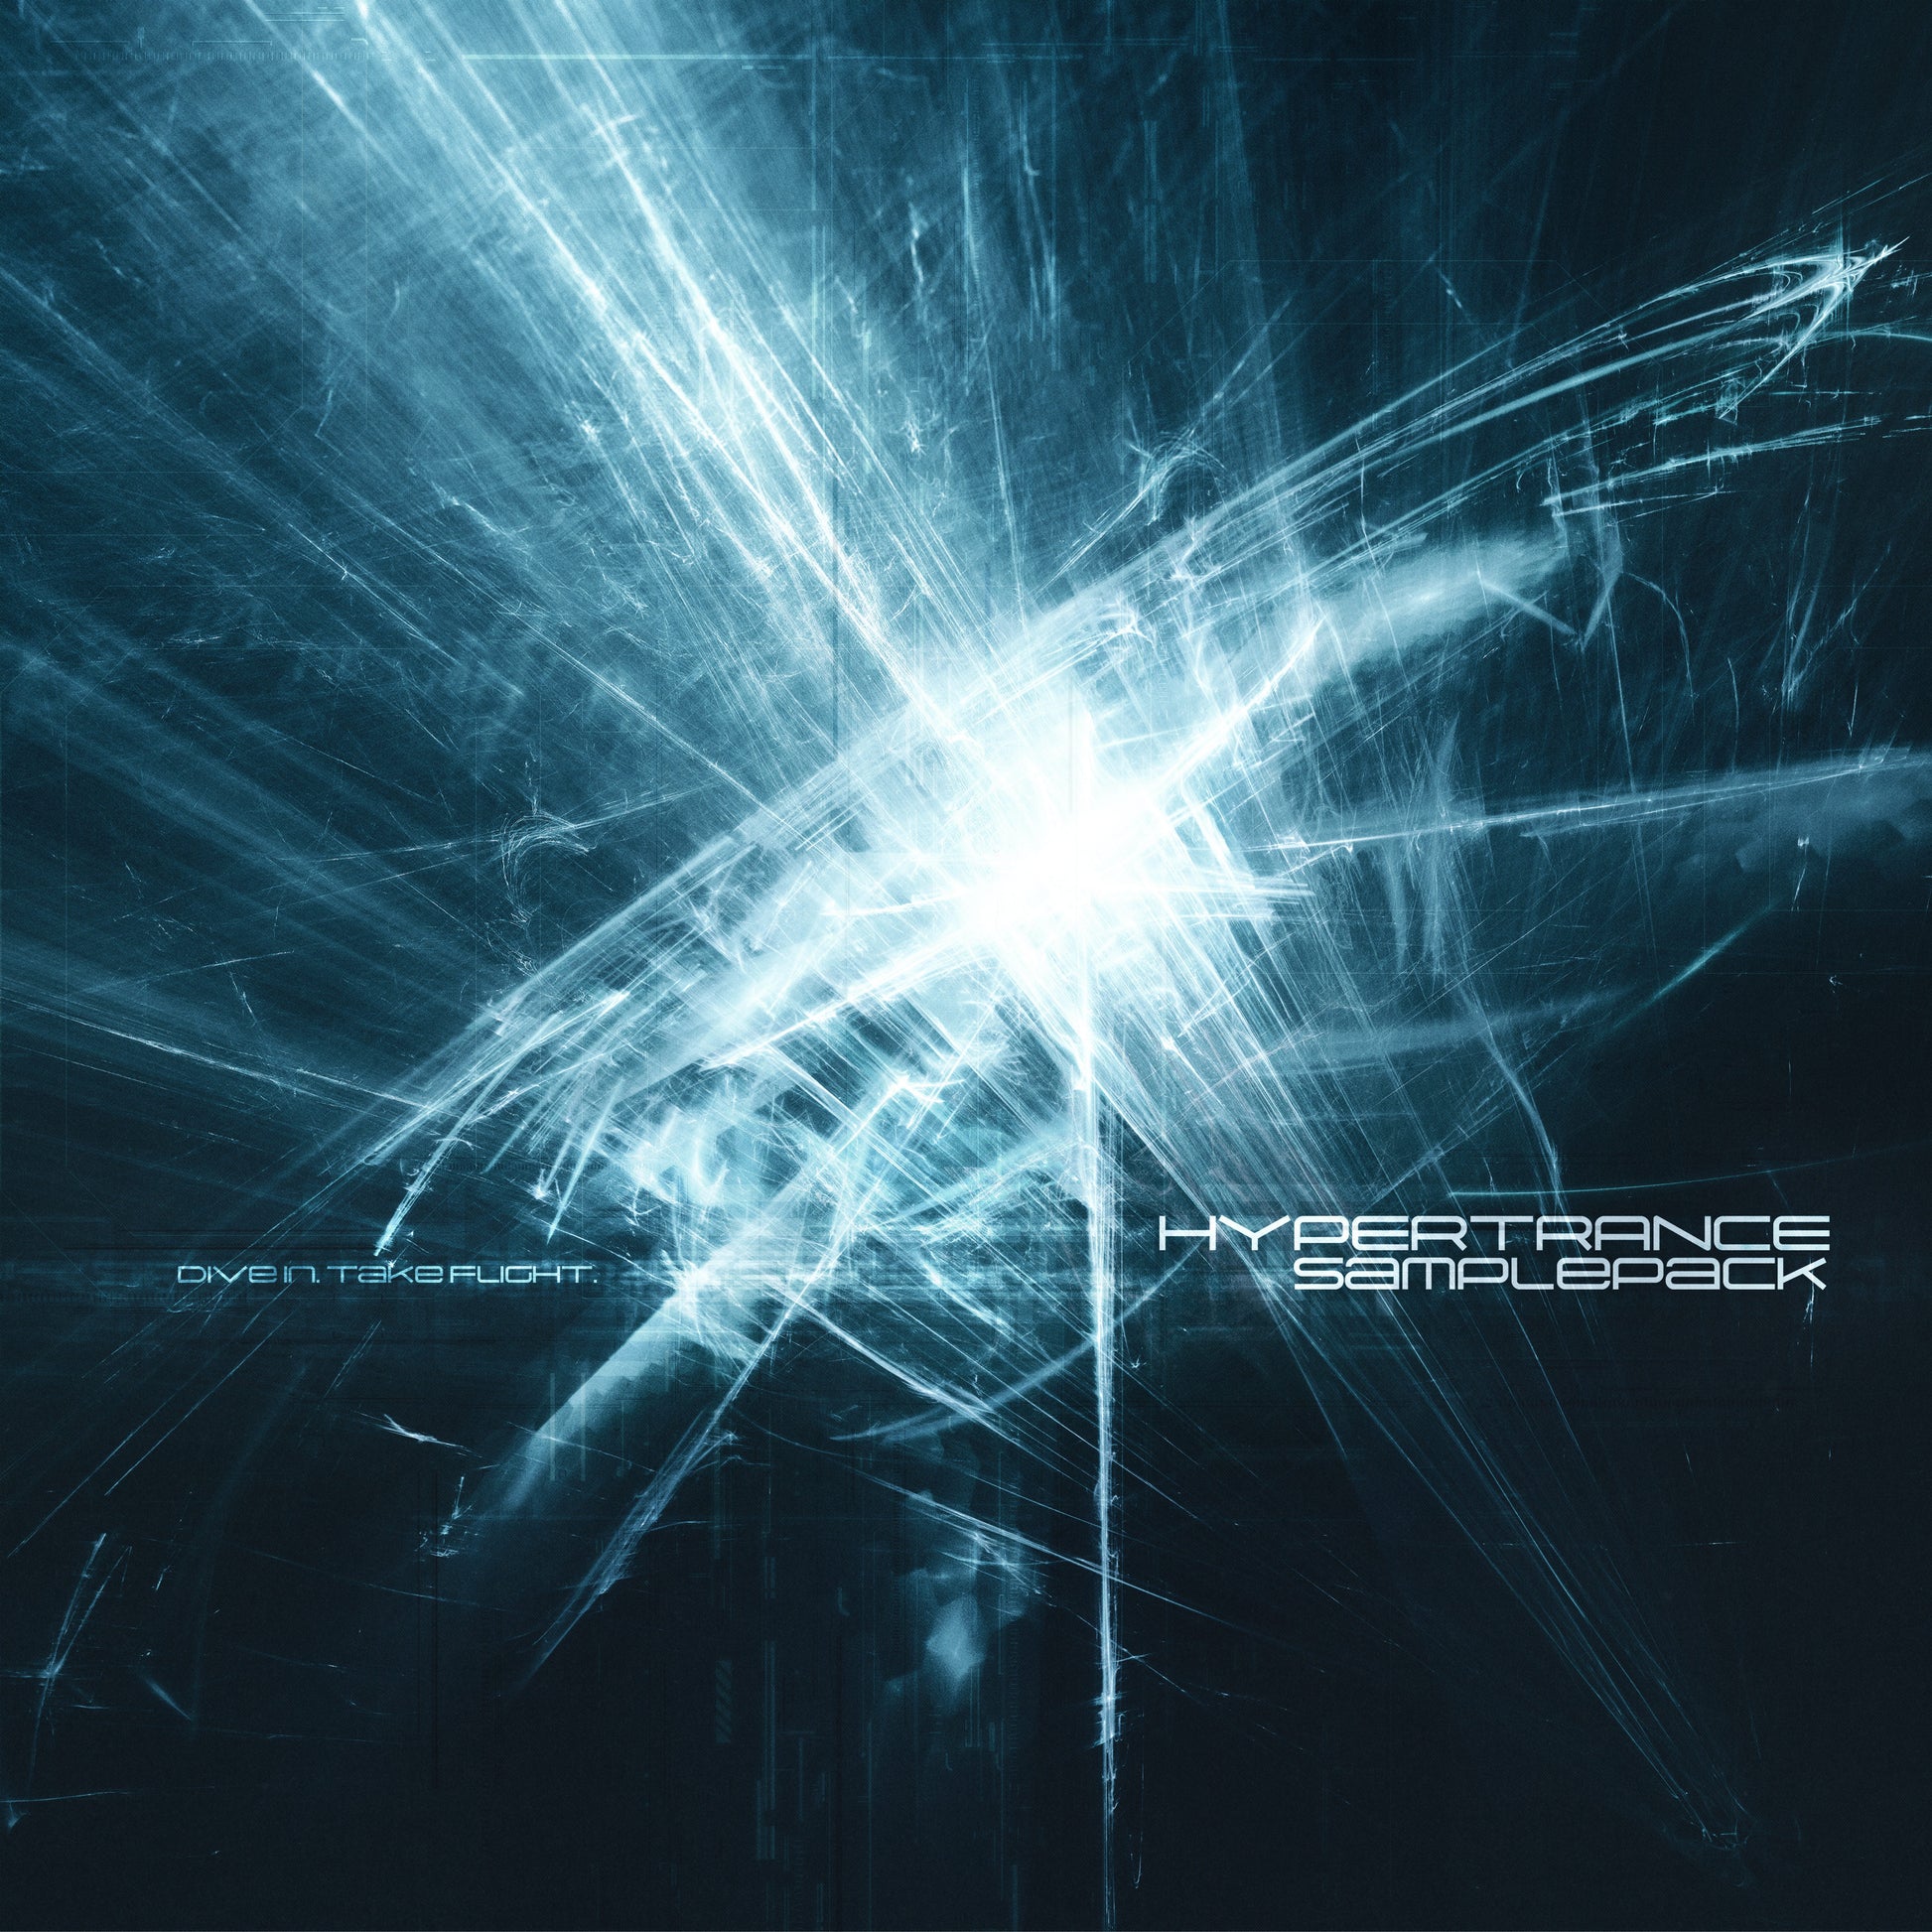 Abstract artwork in the metalheart style, featuring the texts "Hypertrance Samplepack" and "Dive In, Take Flight".